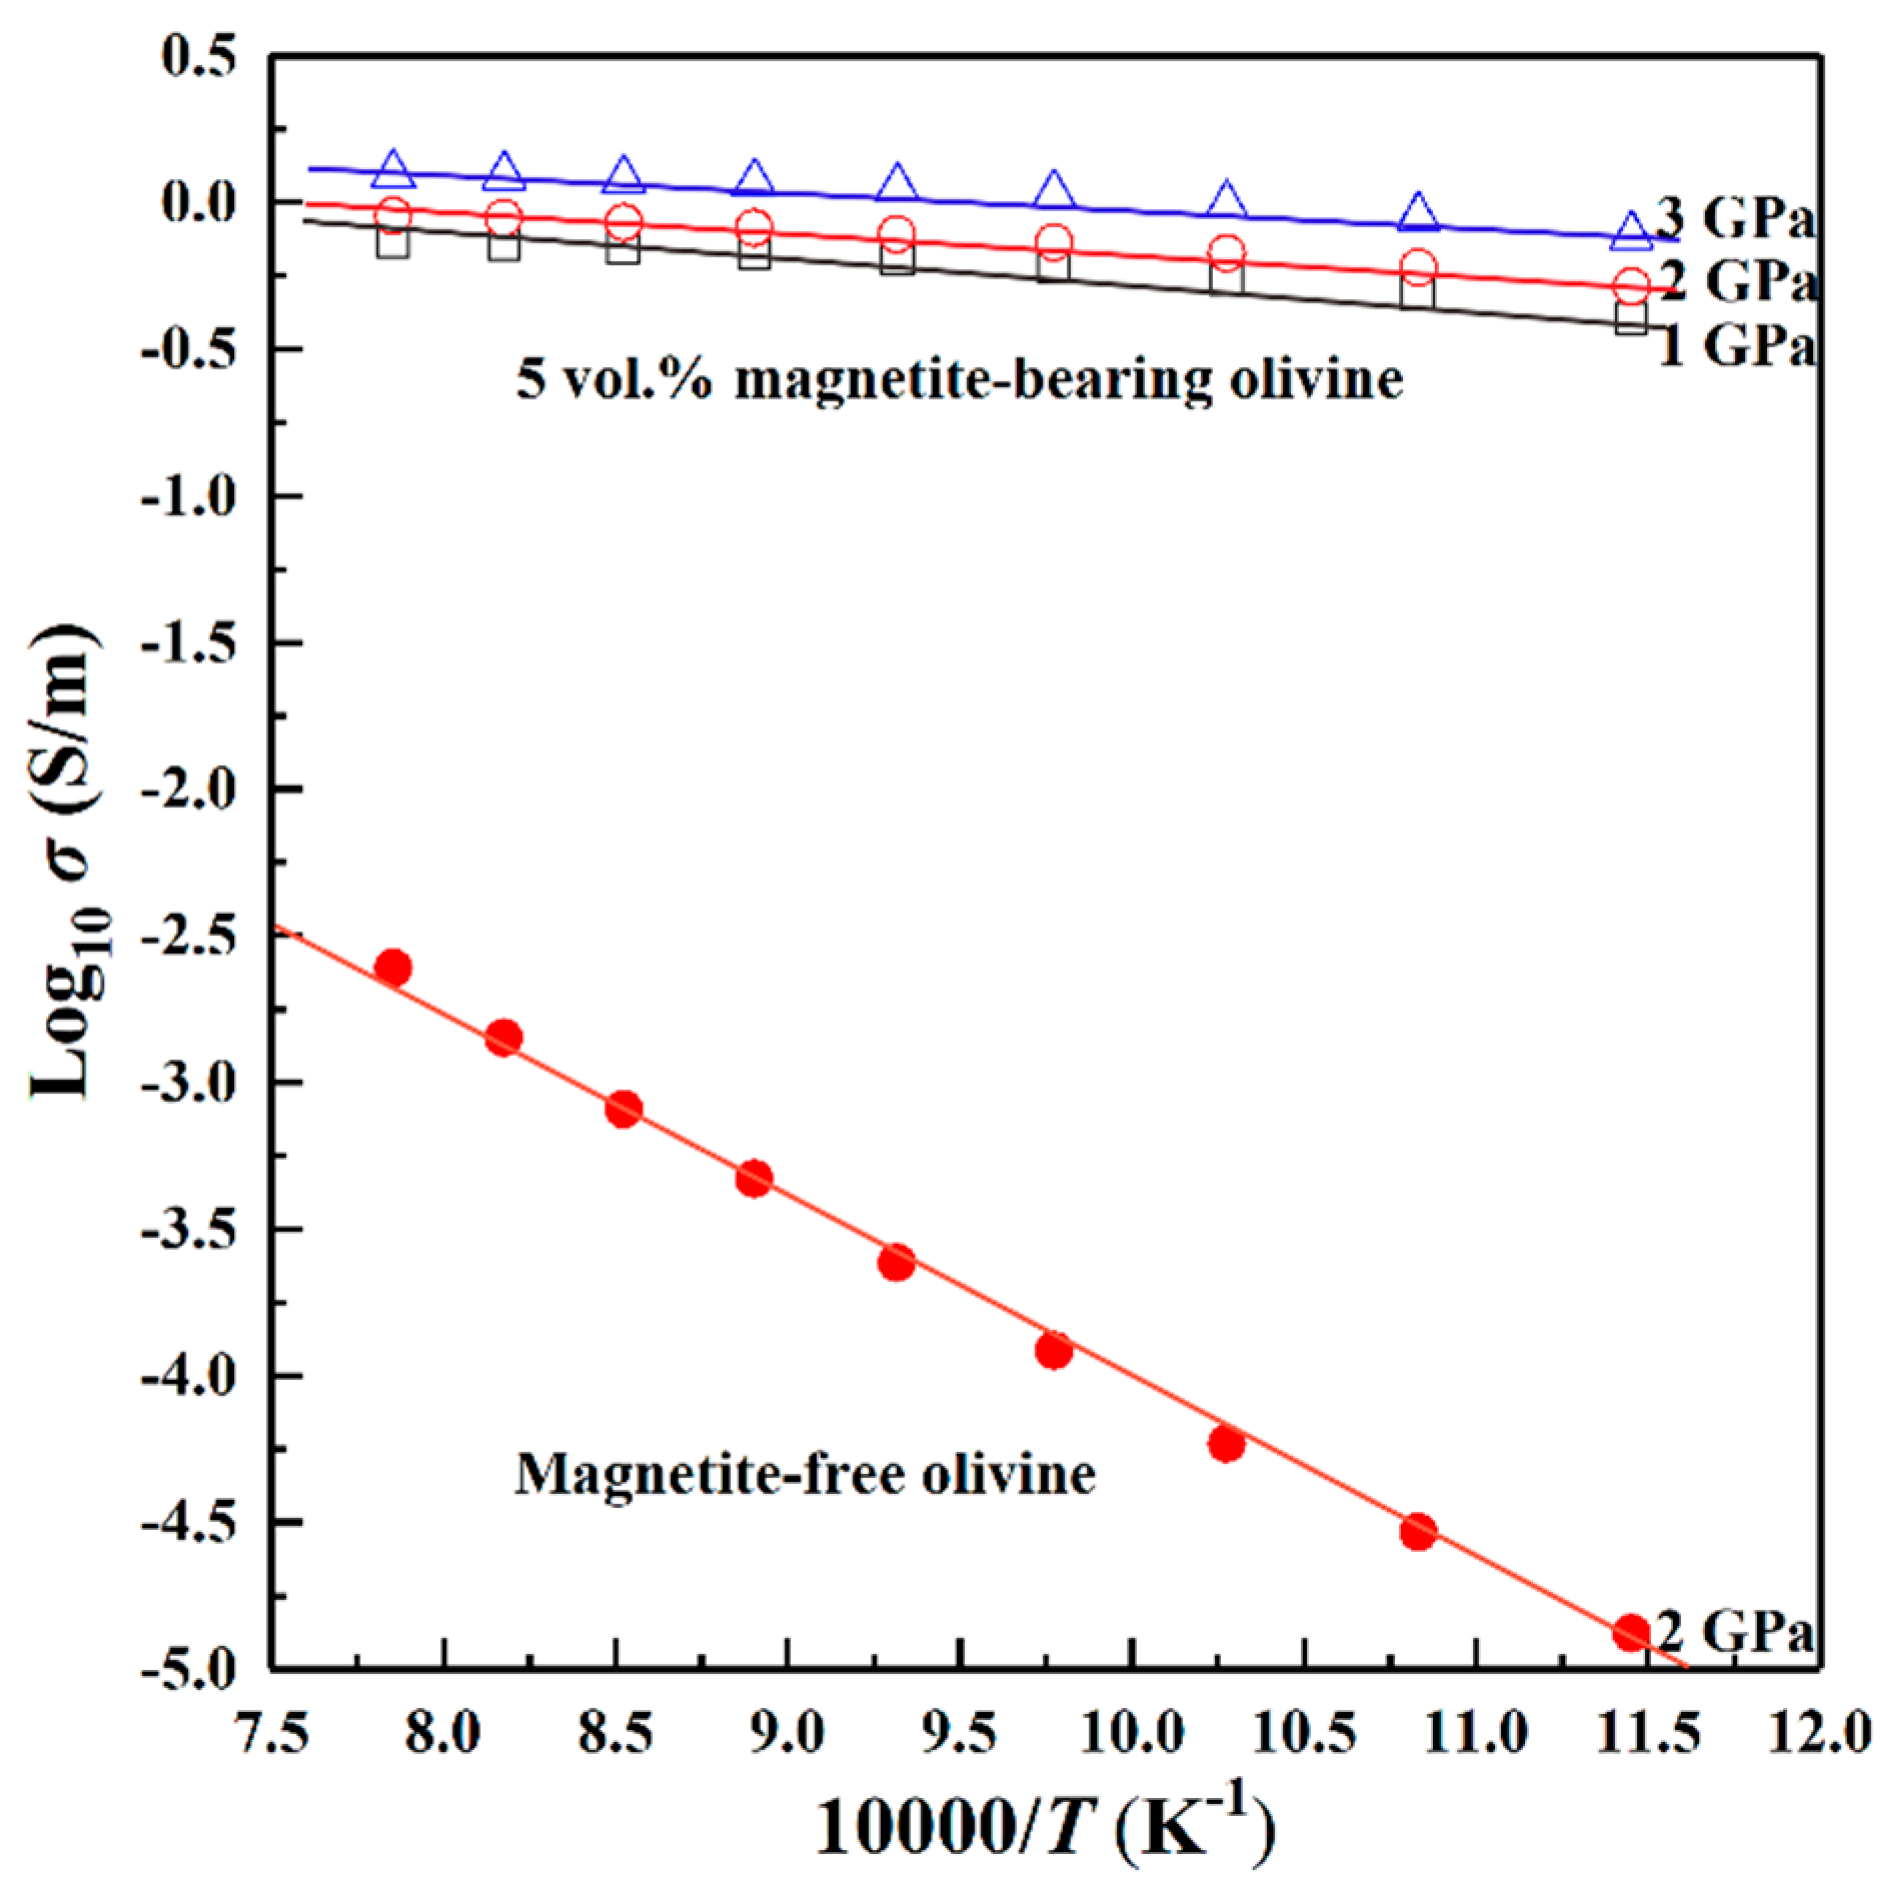 Minerals | Free Full-Text | Influence of High Conductive Magnetite Impurity  on the Electrical Conductivity of Dry Olivine Aggregates at High  Temperature and High Pressure | HTML